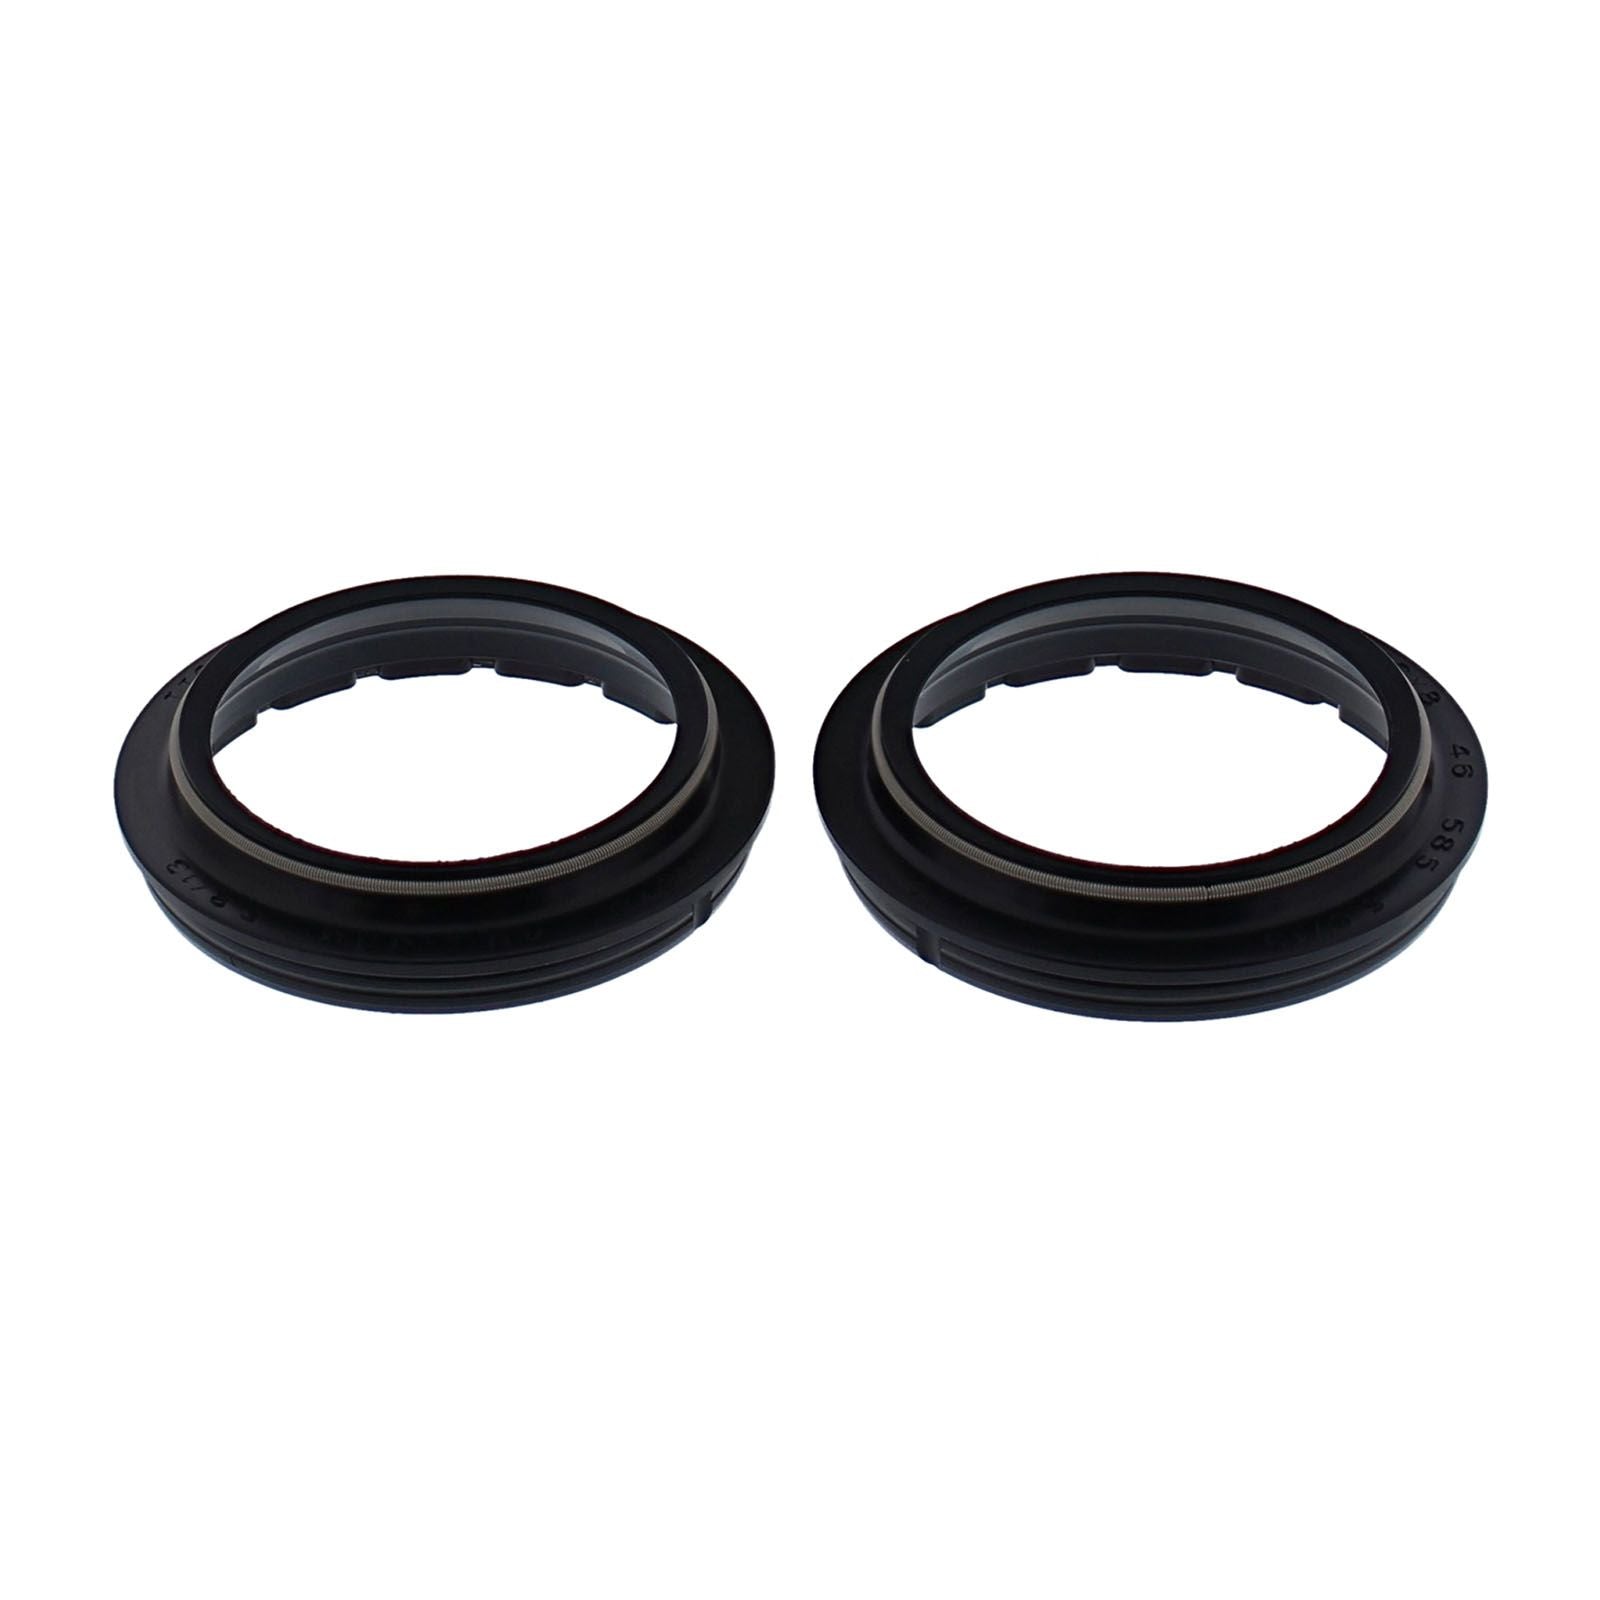 New ALL BALLS Racing Fork Dust Seal Kit #AB57170